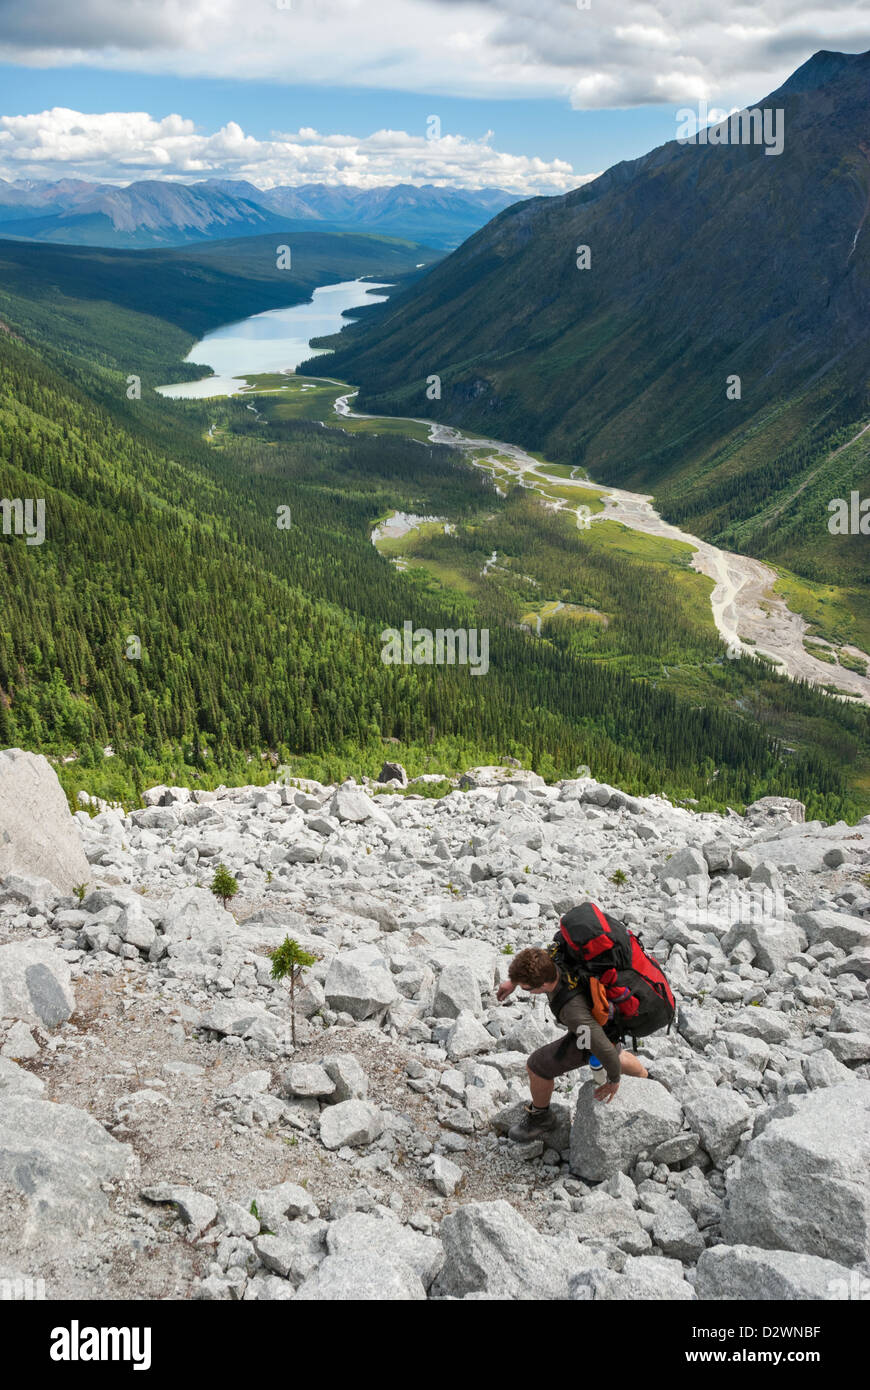 Backpacker ascending a steep talus slope on the route to the Cirque of the Unclimbables in Canada's Northwest Territories. Stock Photo